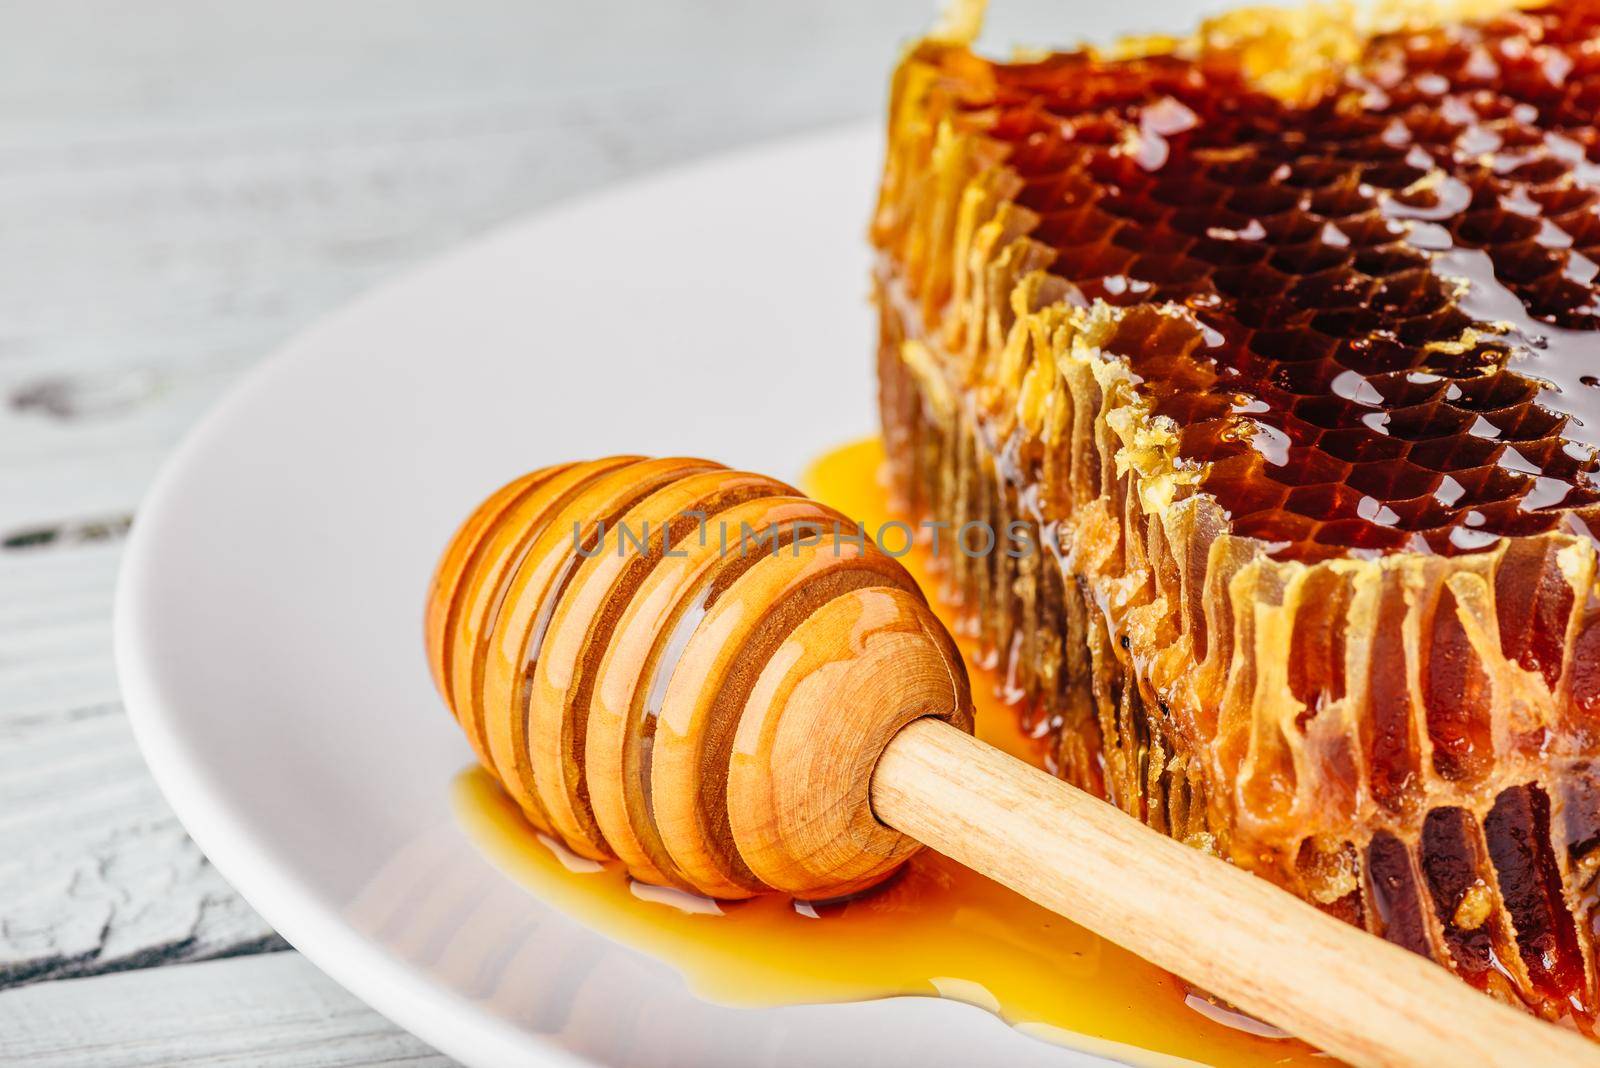 Delicious honeycomb on white plate with wooden honey dipper